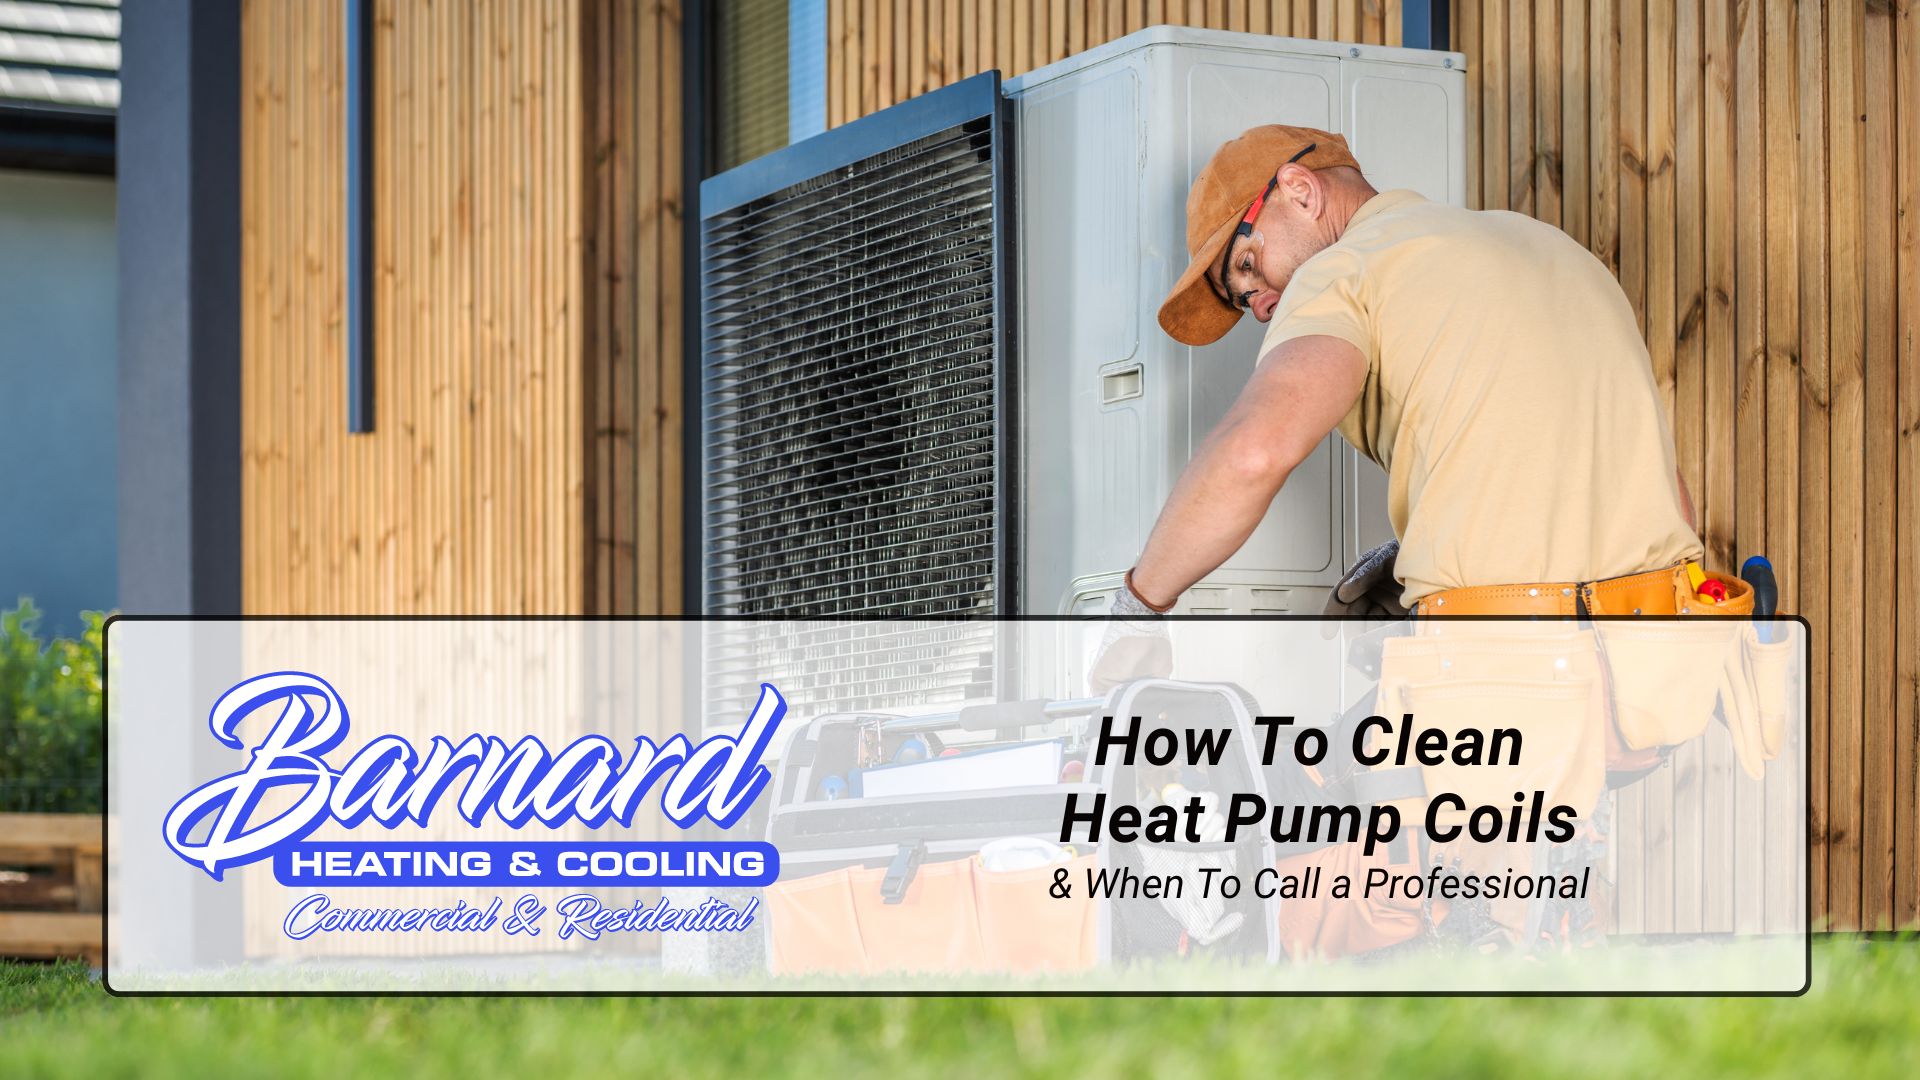 How To Clean Heat Pump Coils